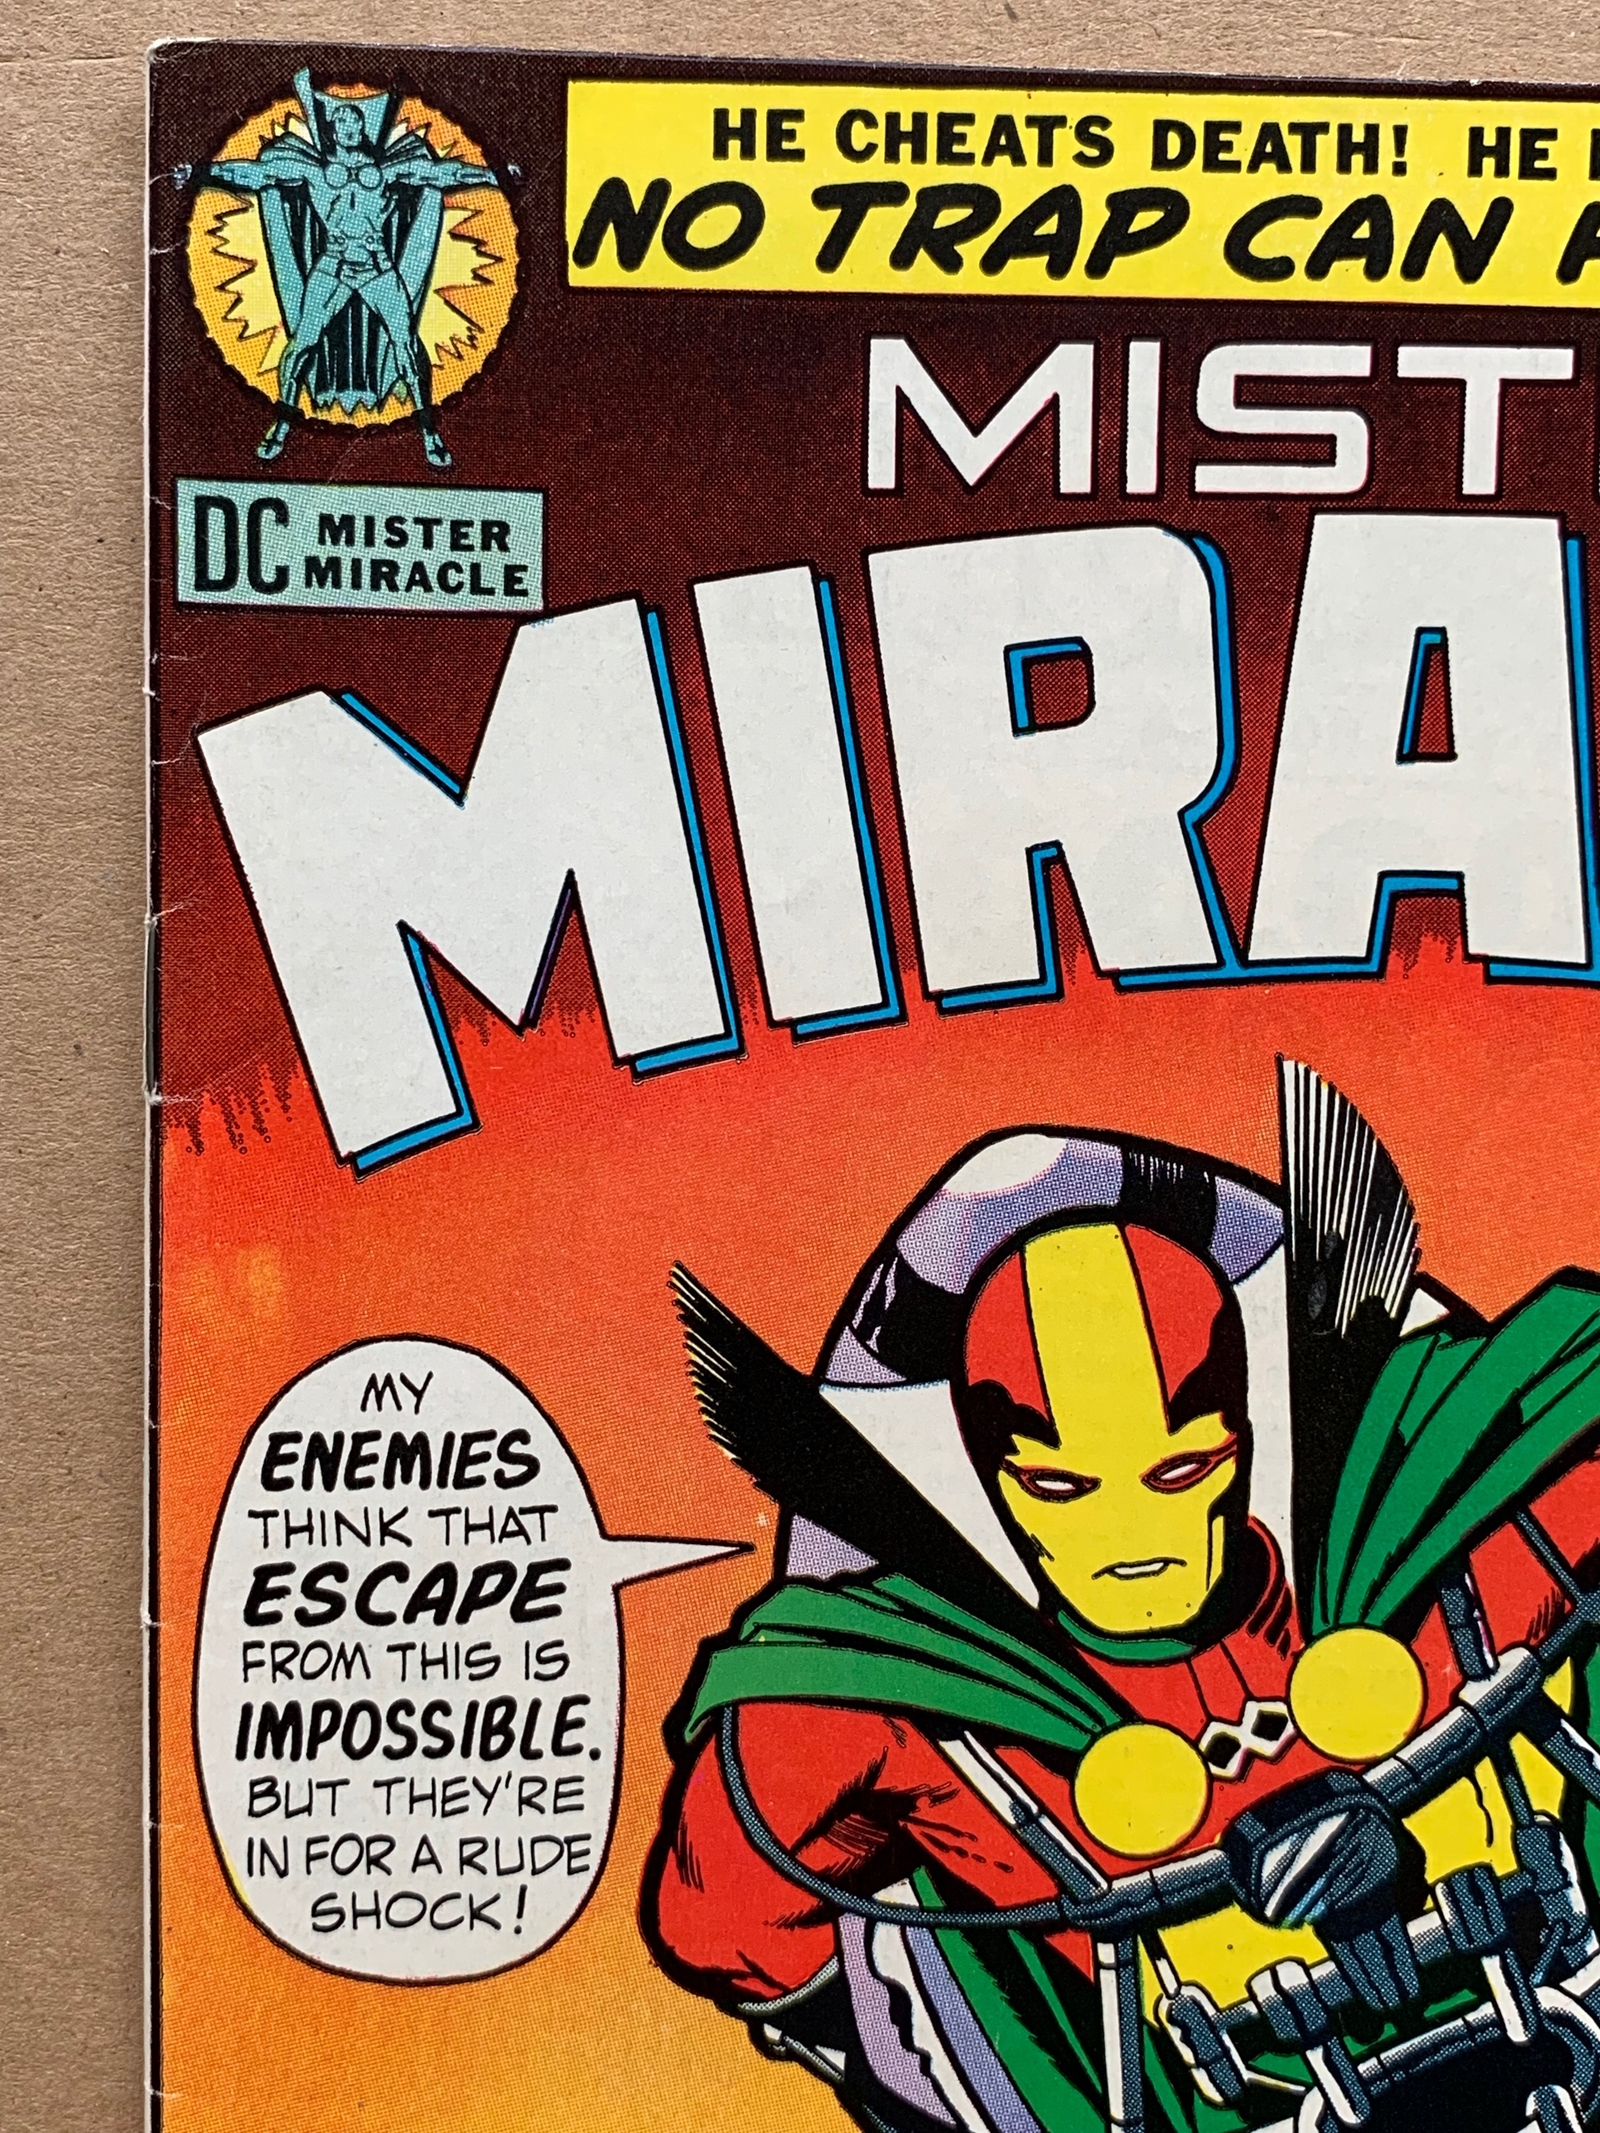 MISTER MIRACLE #1 (1971 - DC) VG/FN (Cents Copy) - First appearances of Mister Miracle and Oberon. - Image 2 of 10